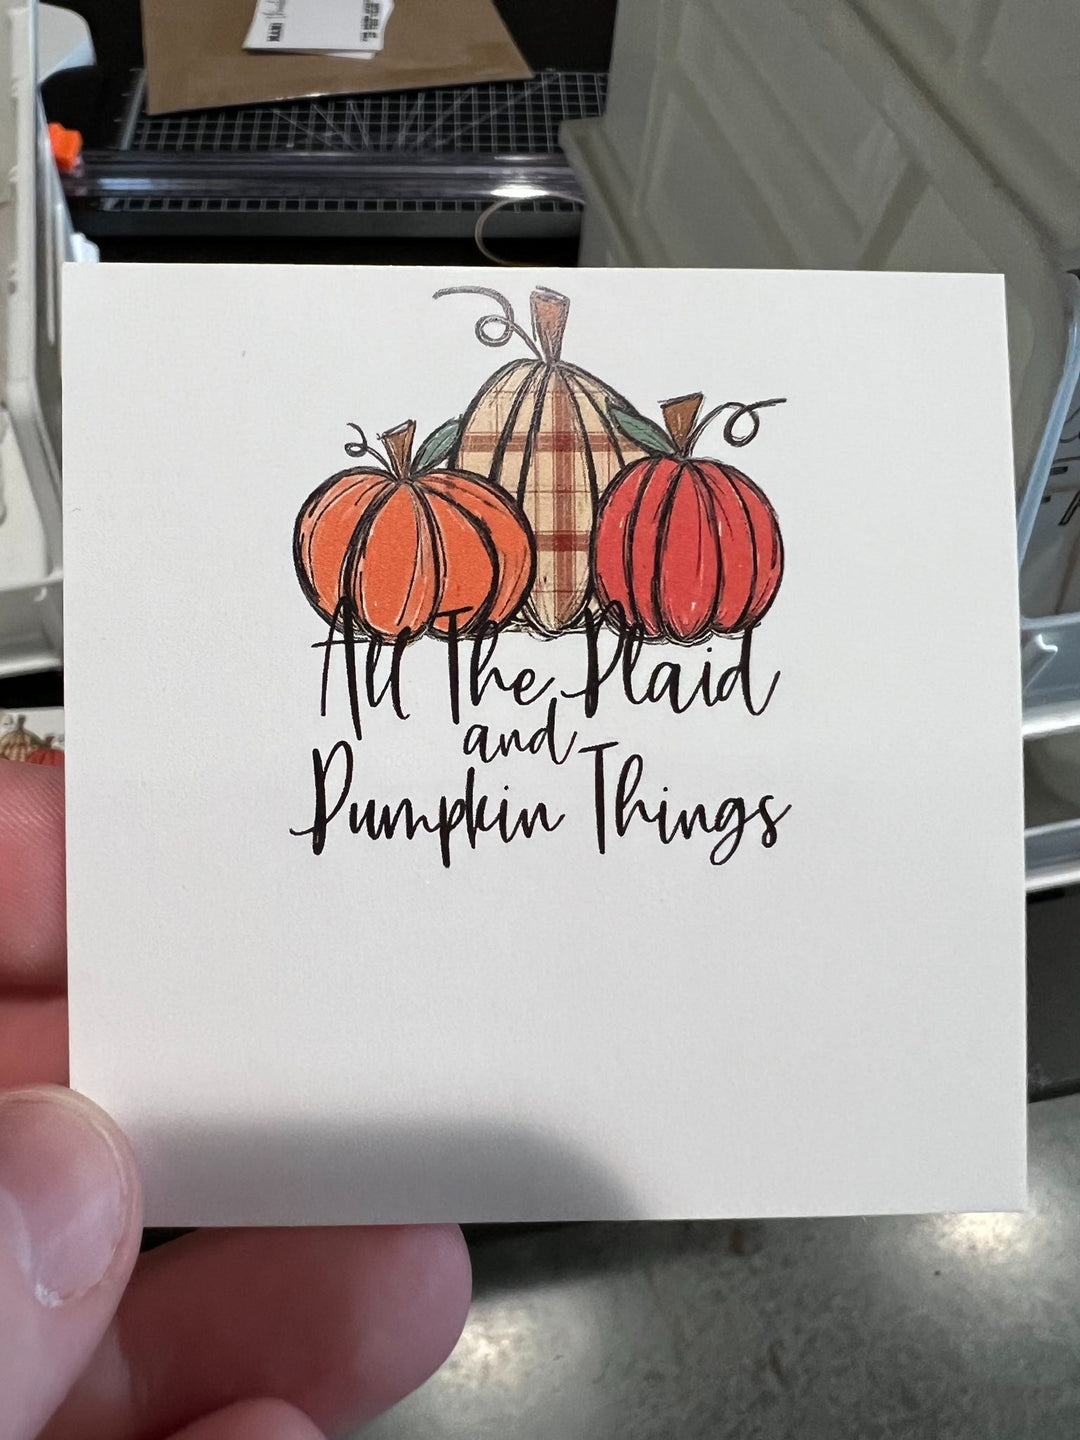 HAIR TIE CARDS ONLY!  | All The Plaid and Pumpkin Things- Hair Tie Card | 10 or 25  Cards |